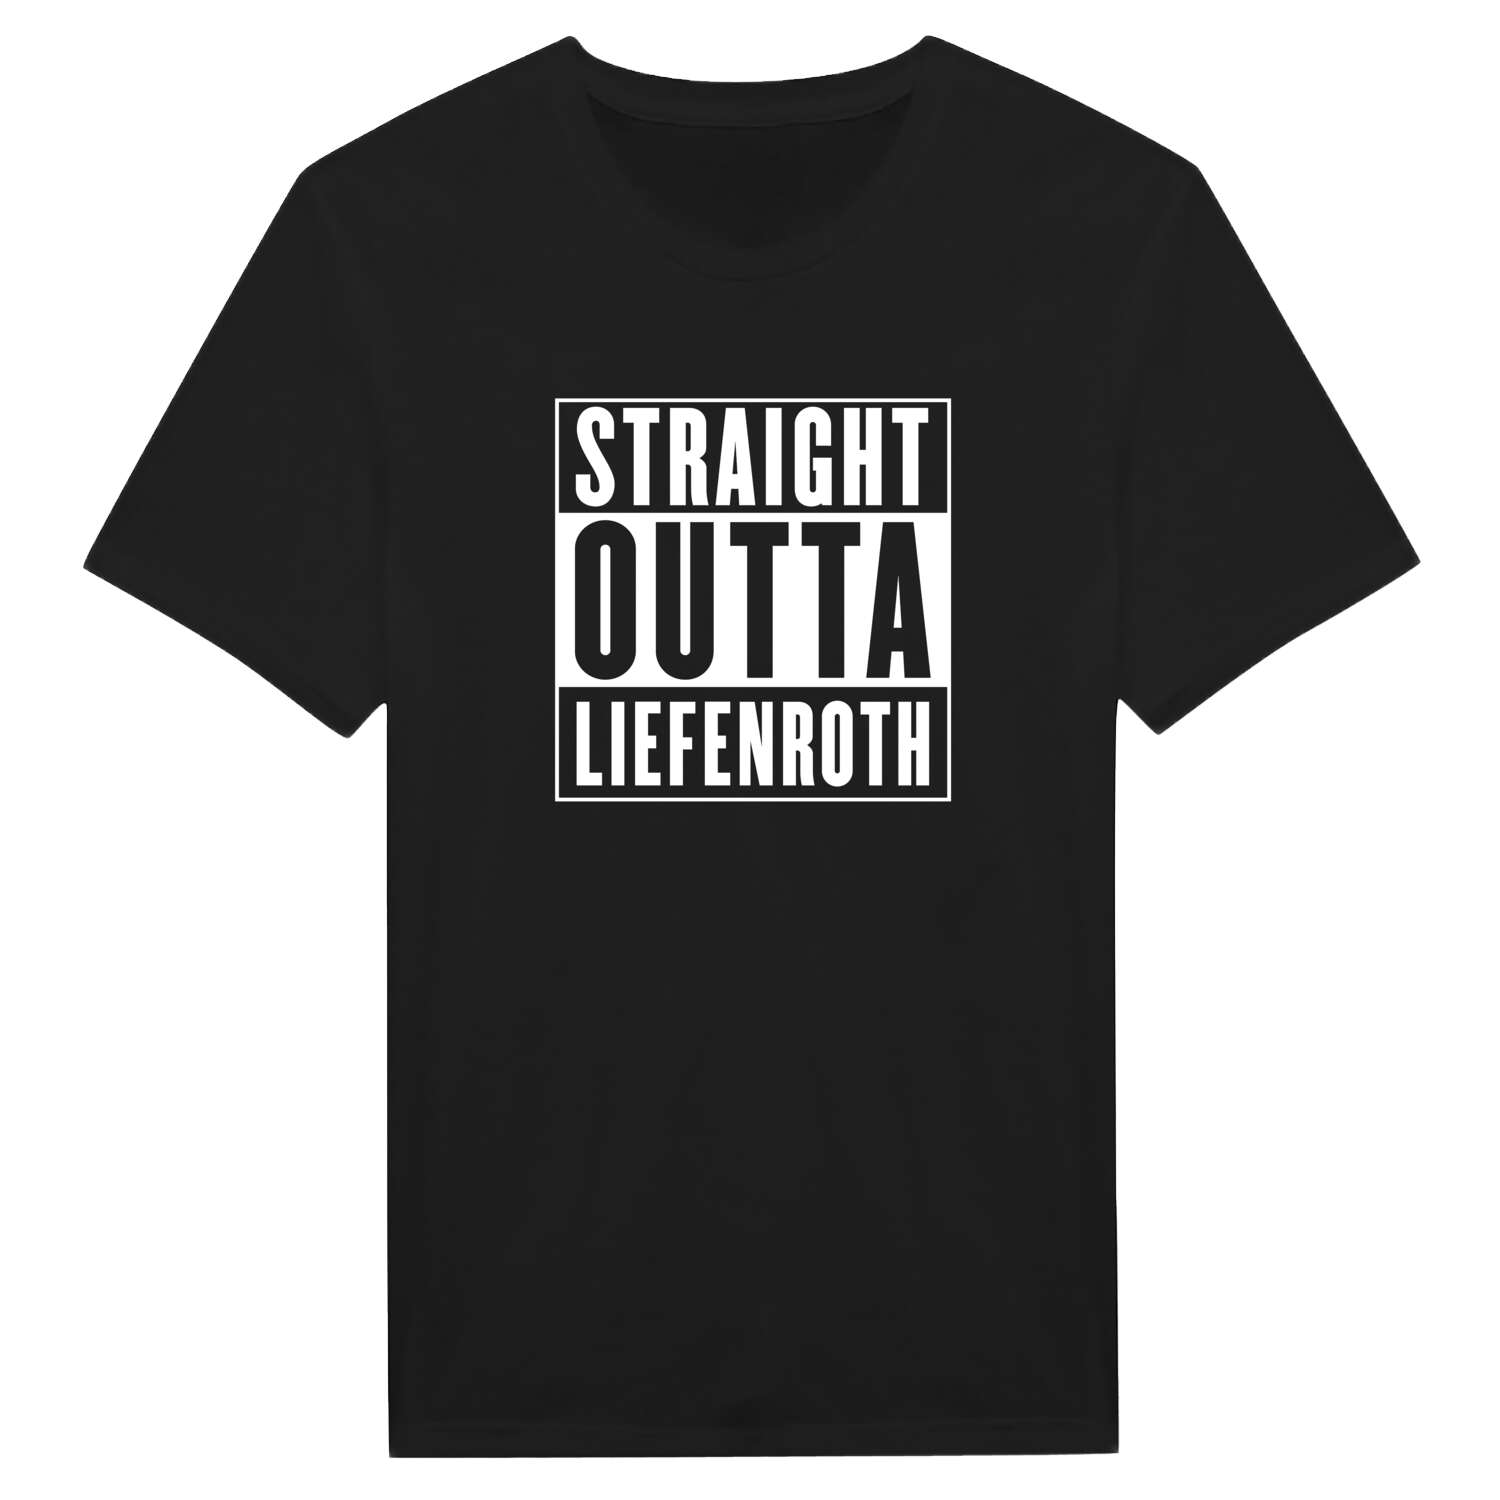 Liefenroth T-Shirt »Straight Outta«